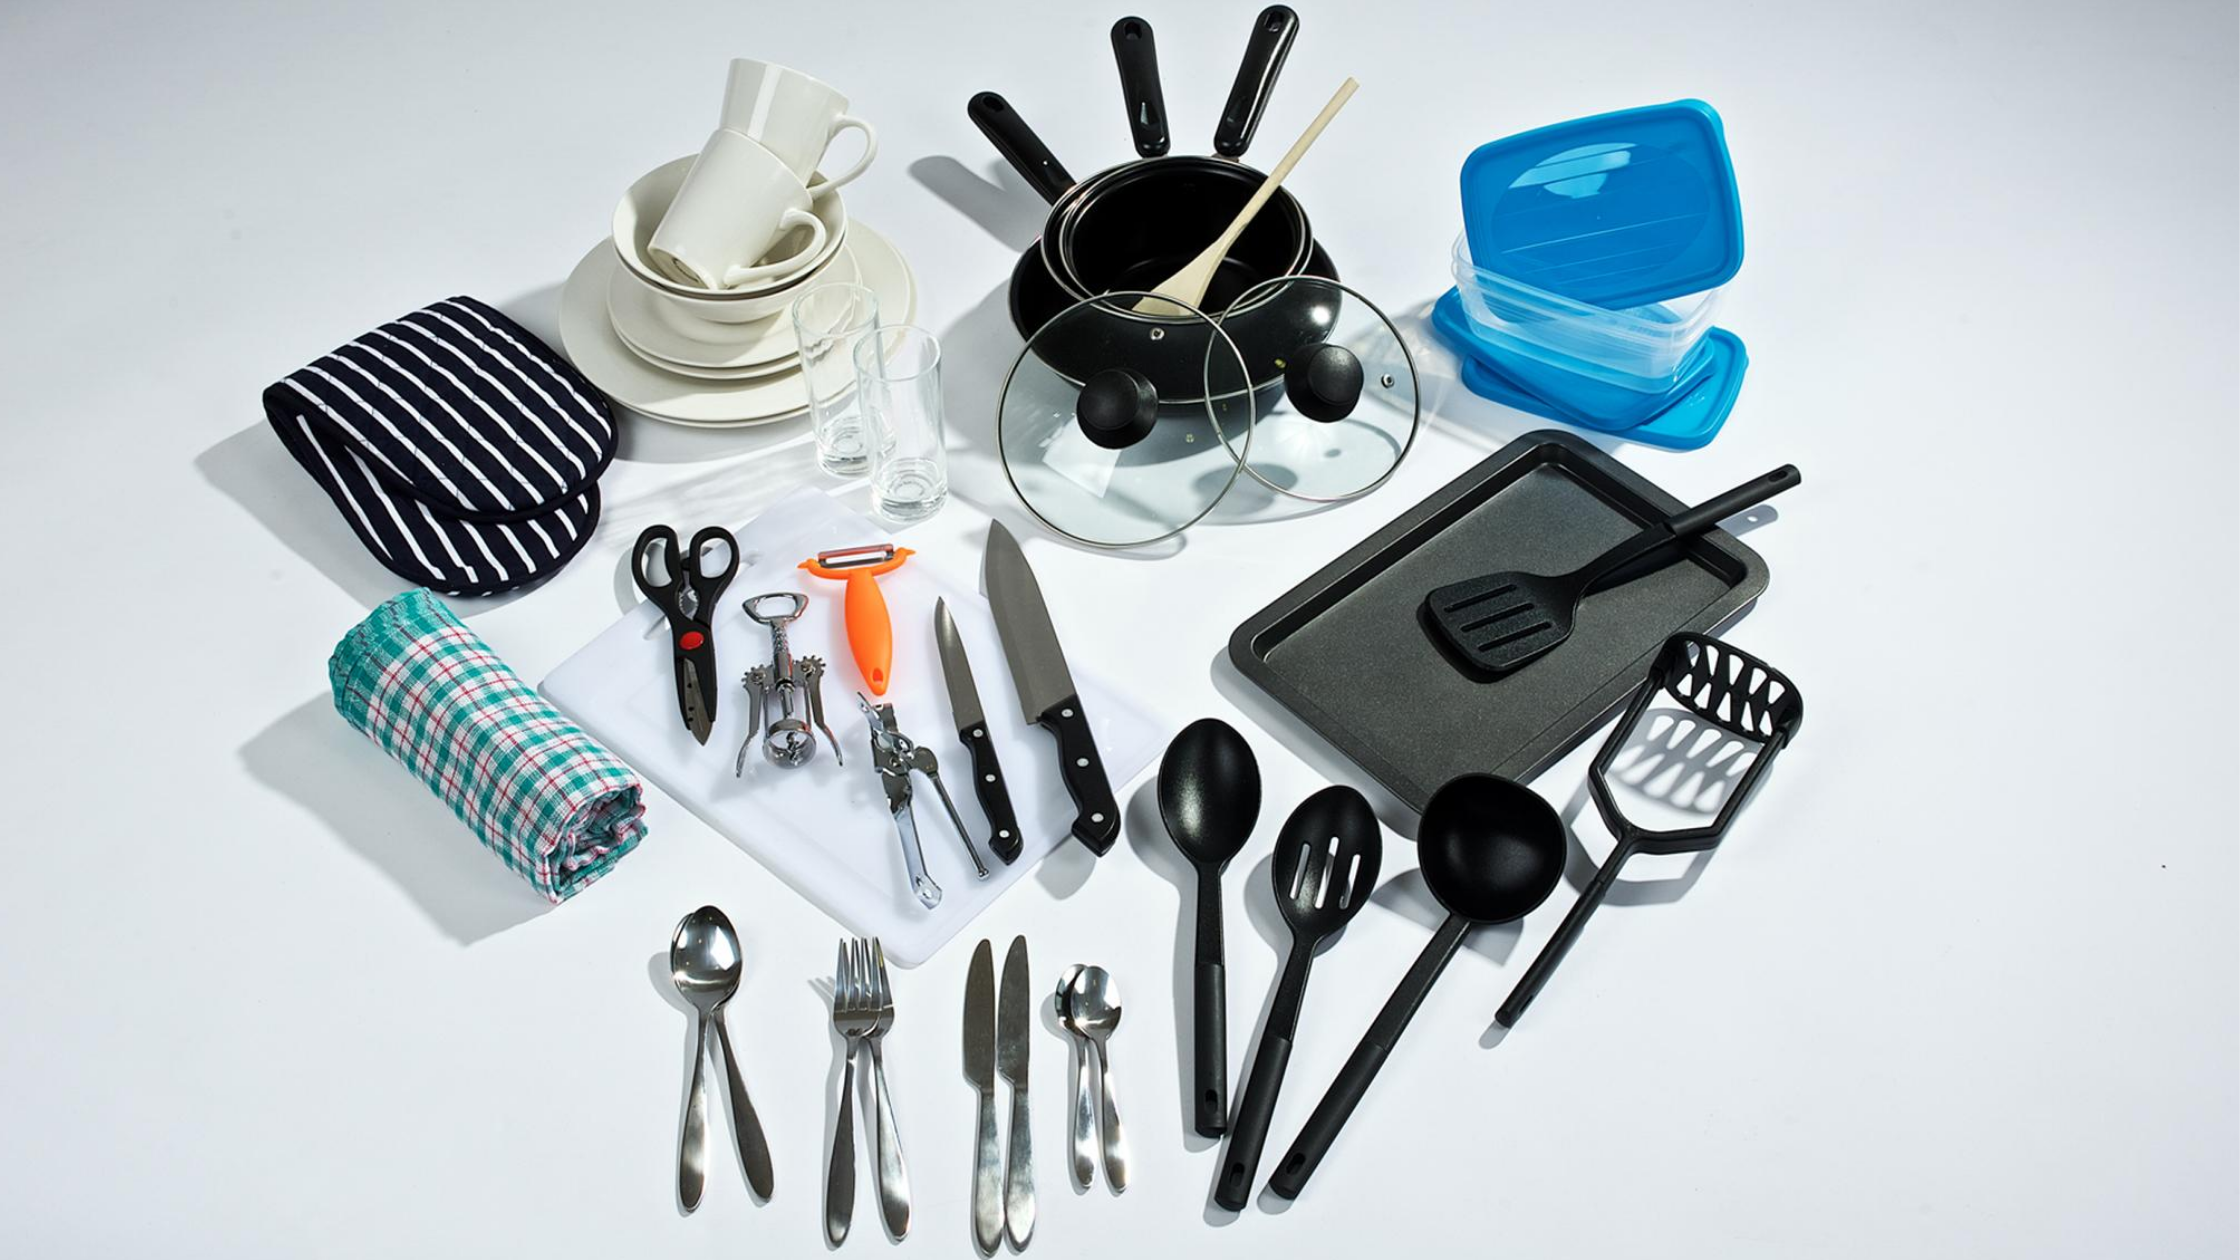 Why Should You Invest in the Right Kind of Kitchenware and Accessories?